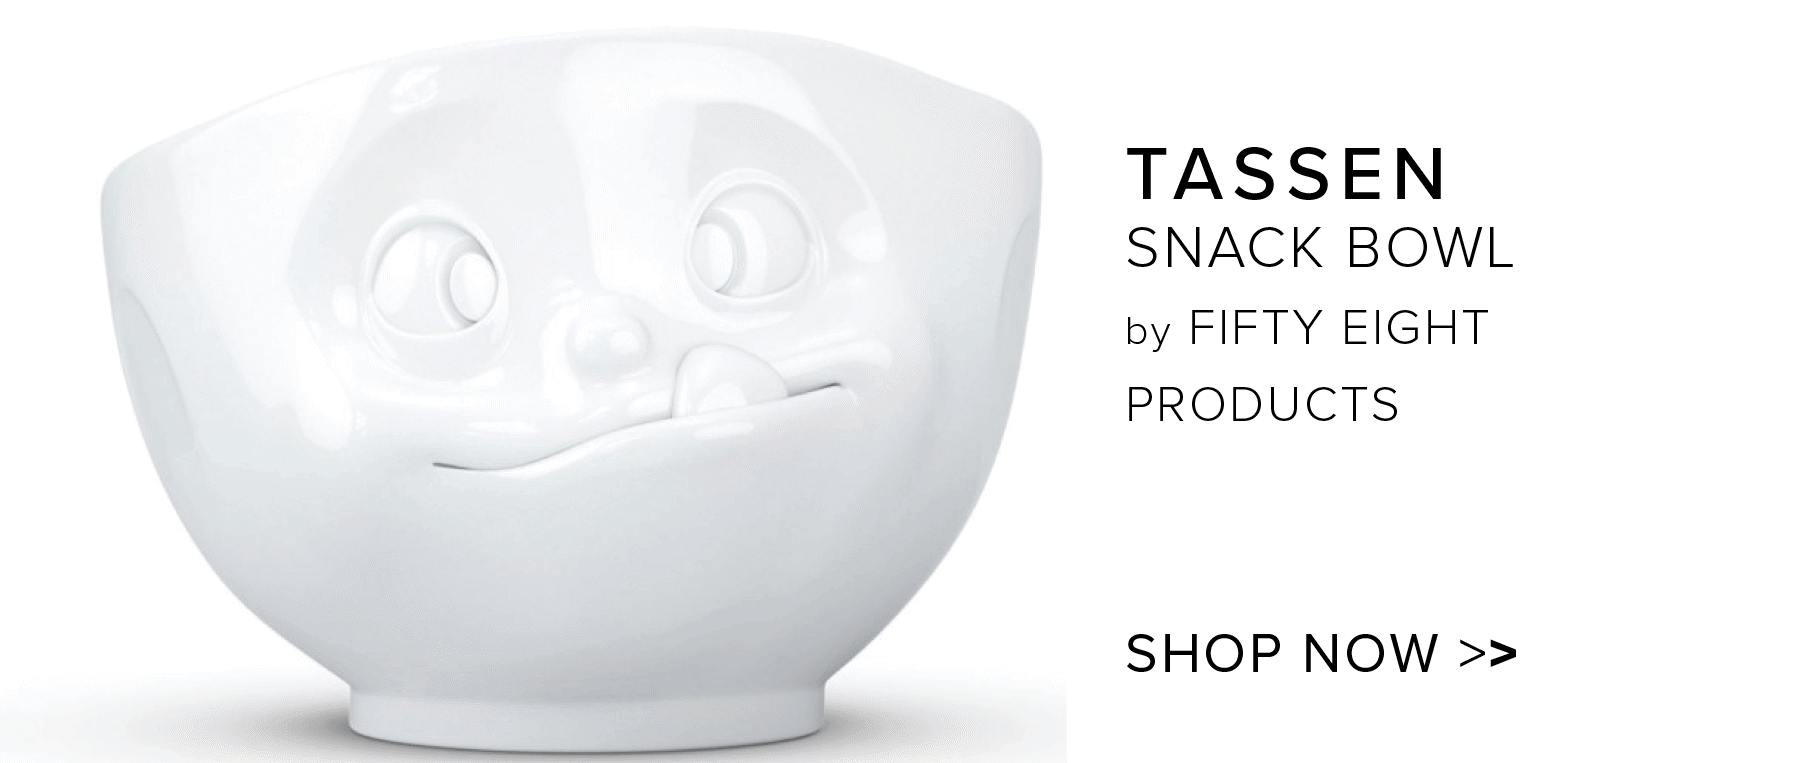 TASSEN SNACK BOWL by FIFTY EIGHT PRODUCTS SHOP NOW 